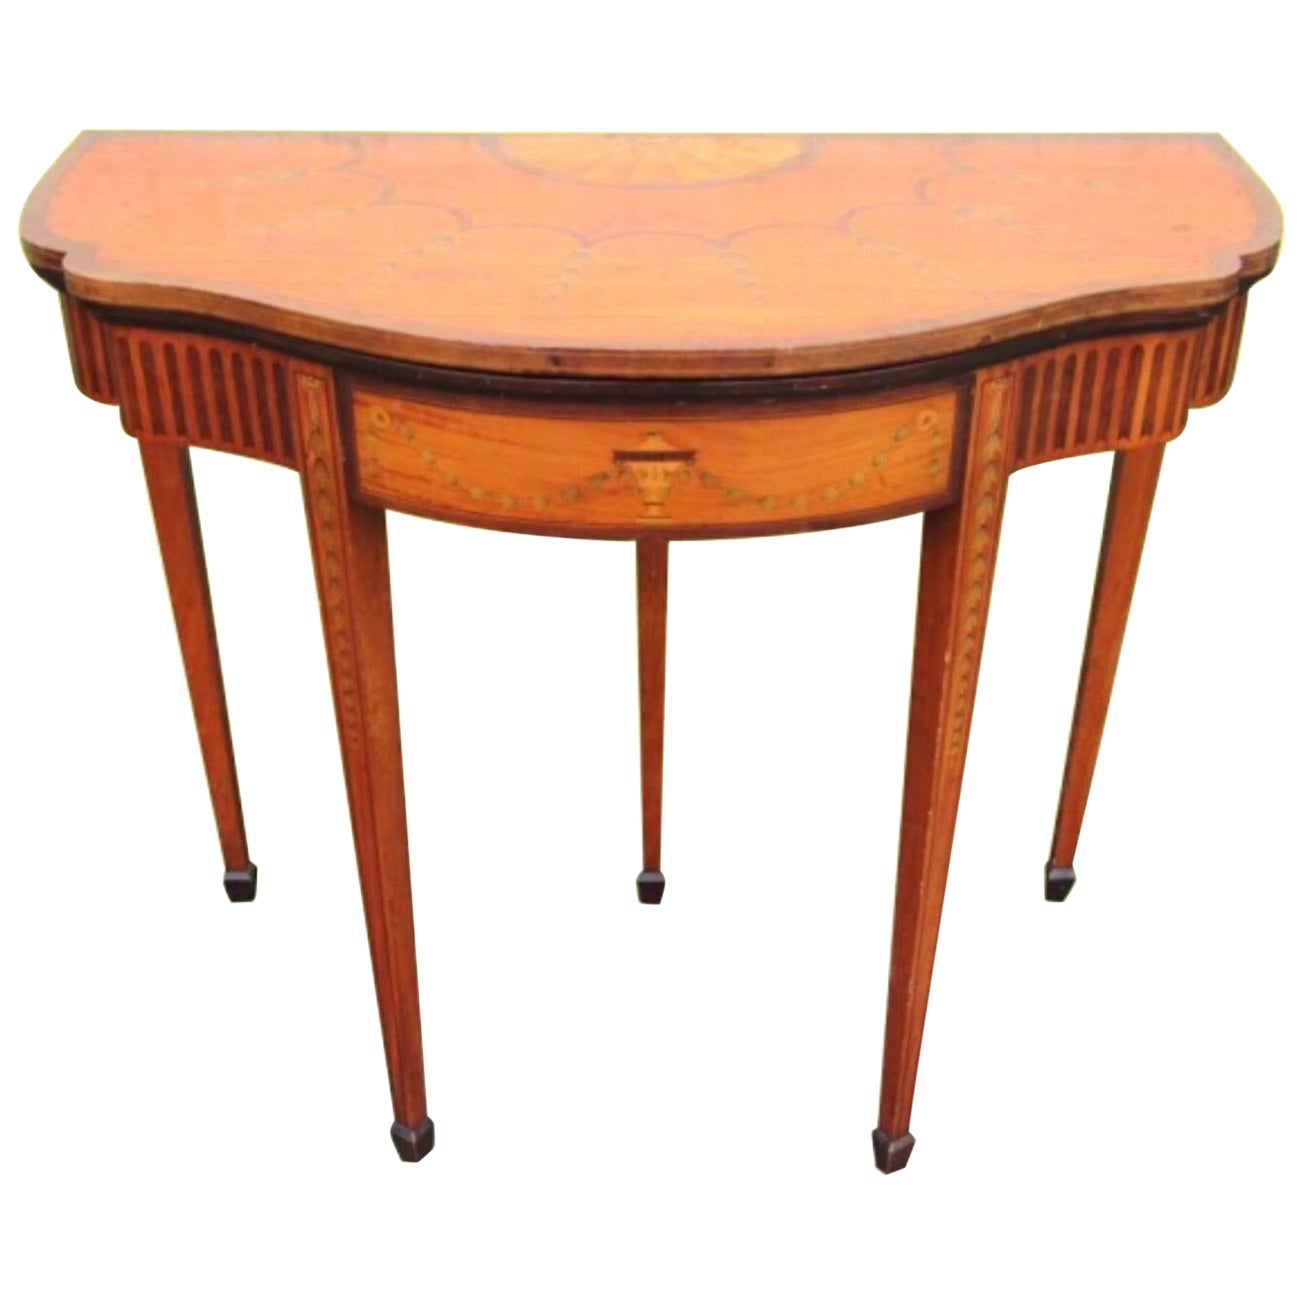 Antique Sheridan Painted Satin Wood Games Table,Card Table